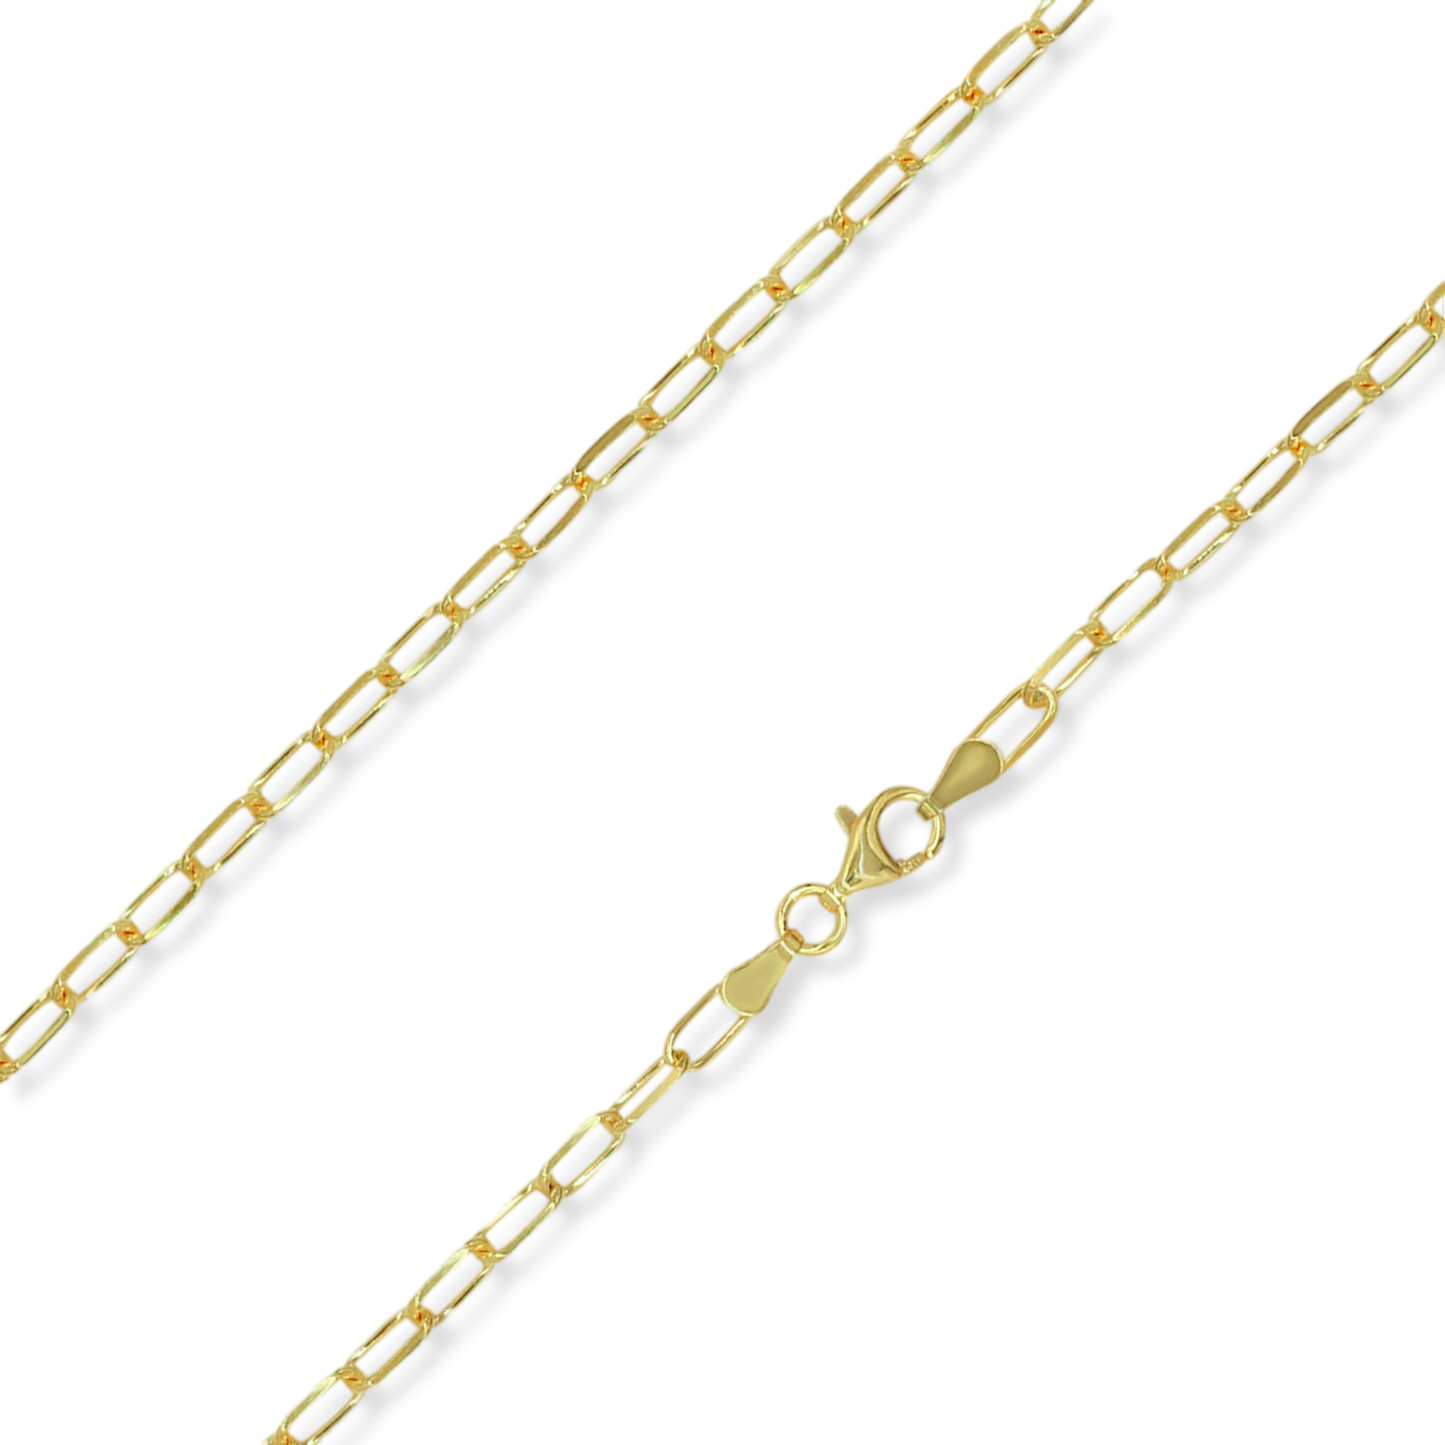 Stellari Gold 18 Karat over Sterling Silver 3.0mm Paperclip Link Chain